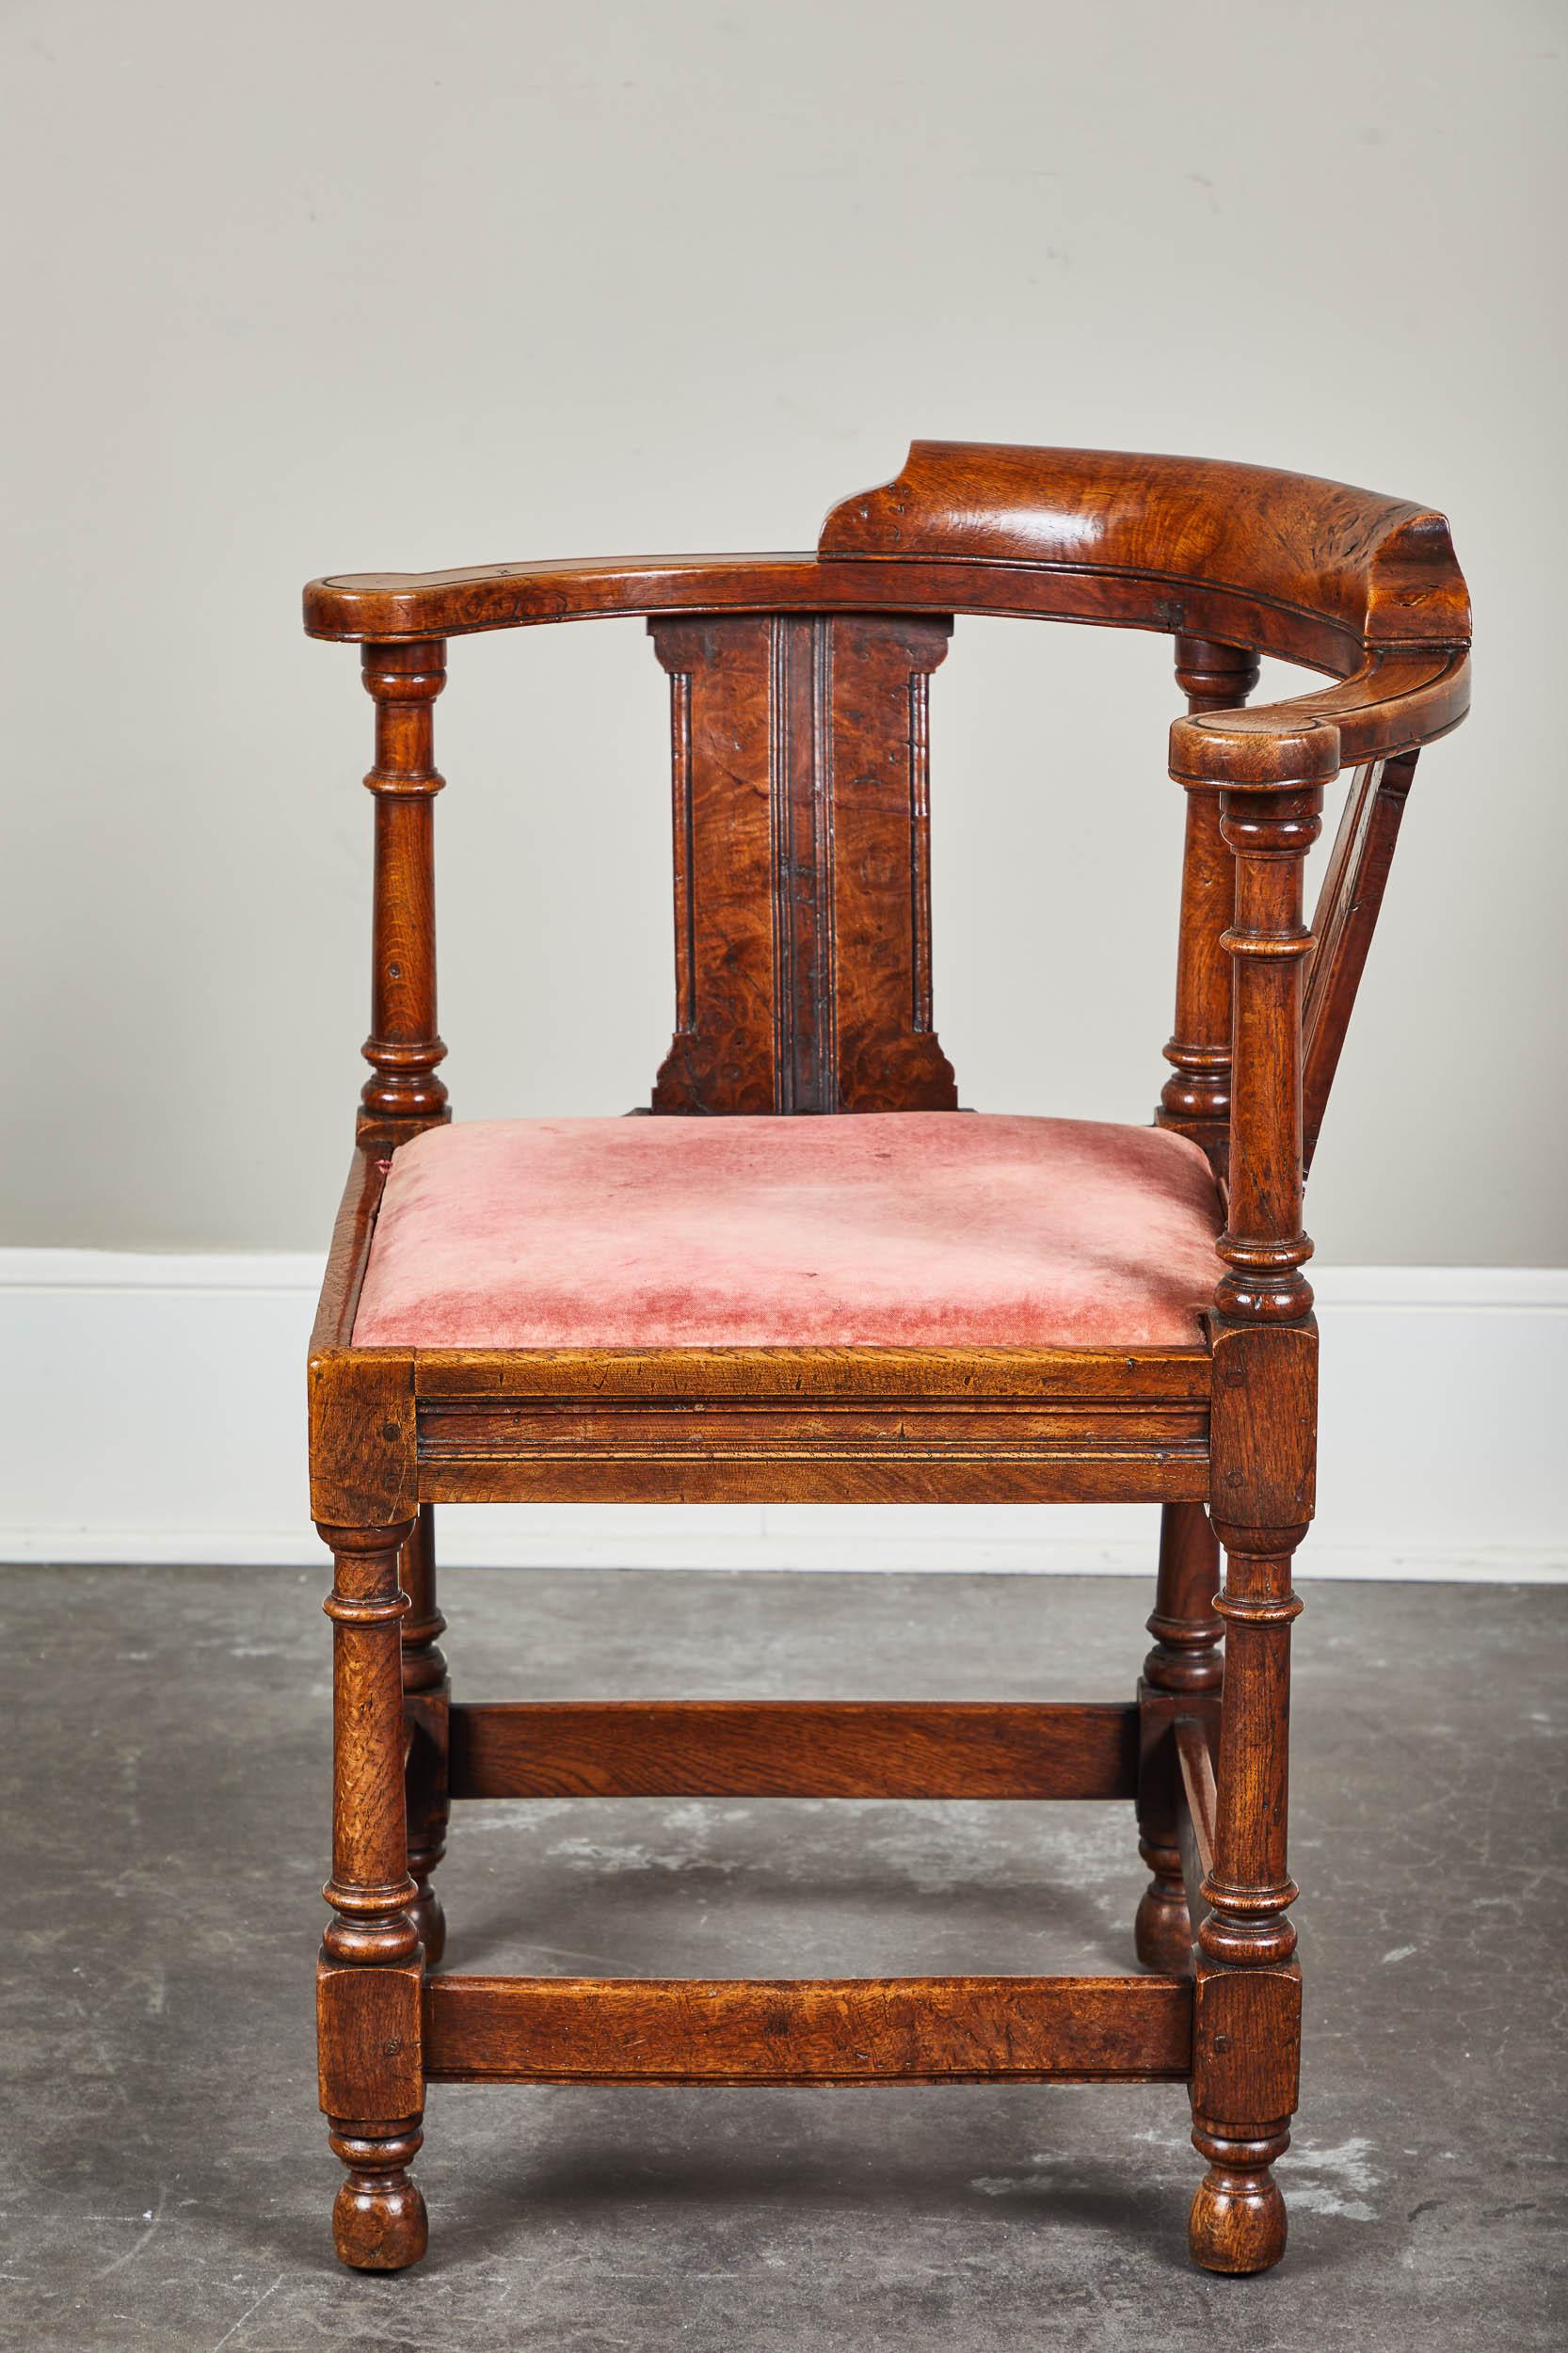 Late 18th century oak and burl yew wood library corner chair with rich burl and tone. English, turned legs and posts. Minor repair done on stretcher - done previously and very well. Simple carving on arm rests and splats. Muted red velvet seat